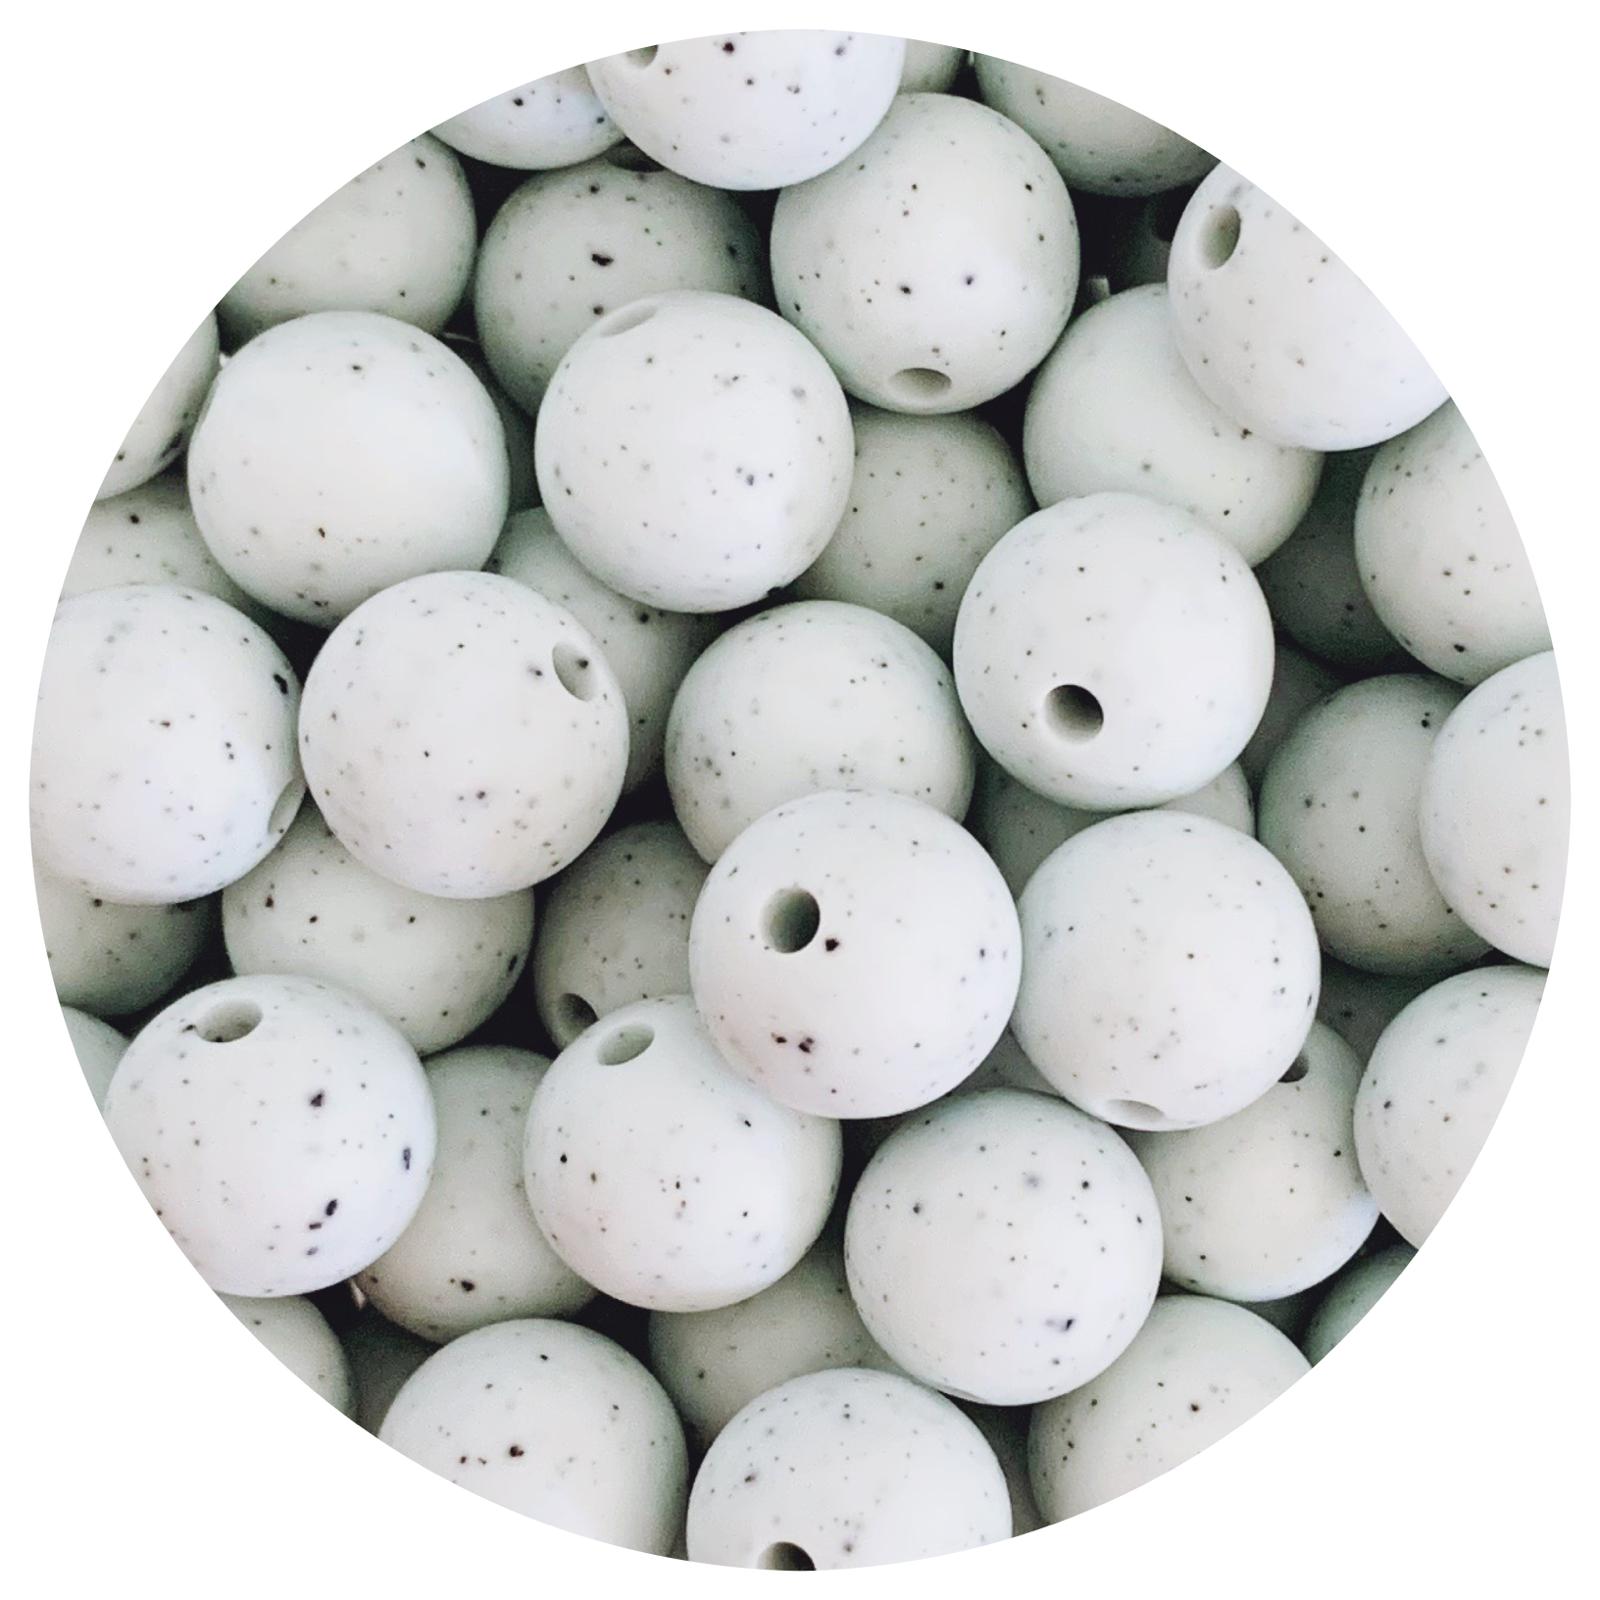 Seabreeze Speckled - 19mm round - 5 Beads